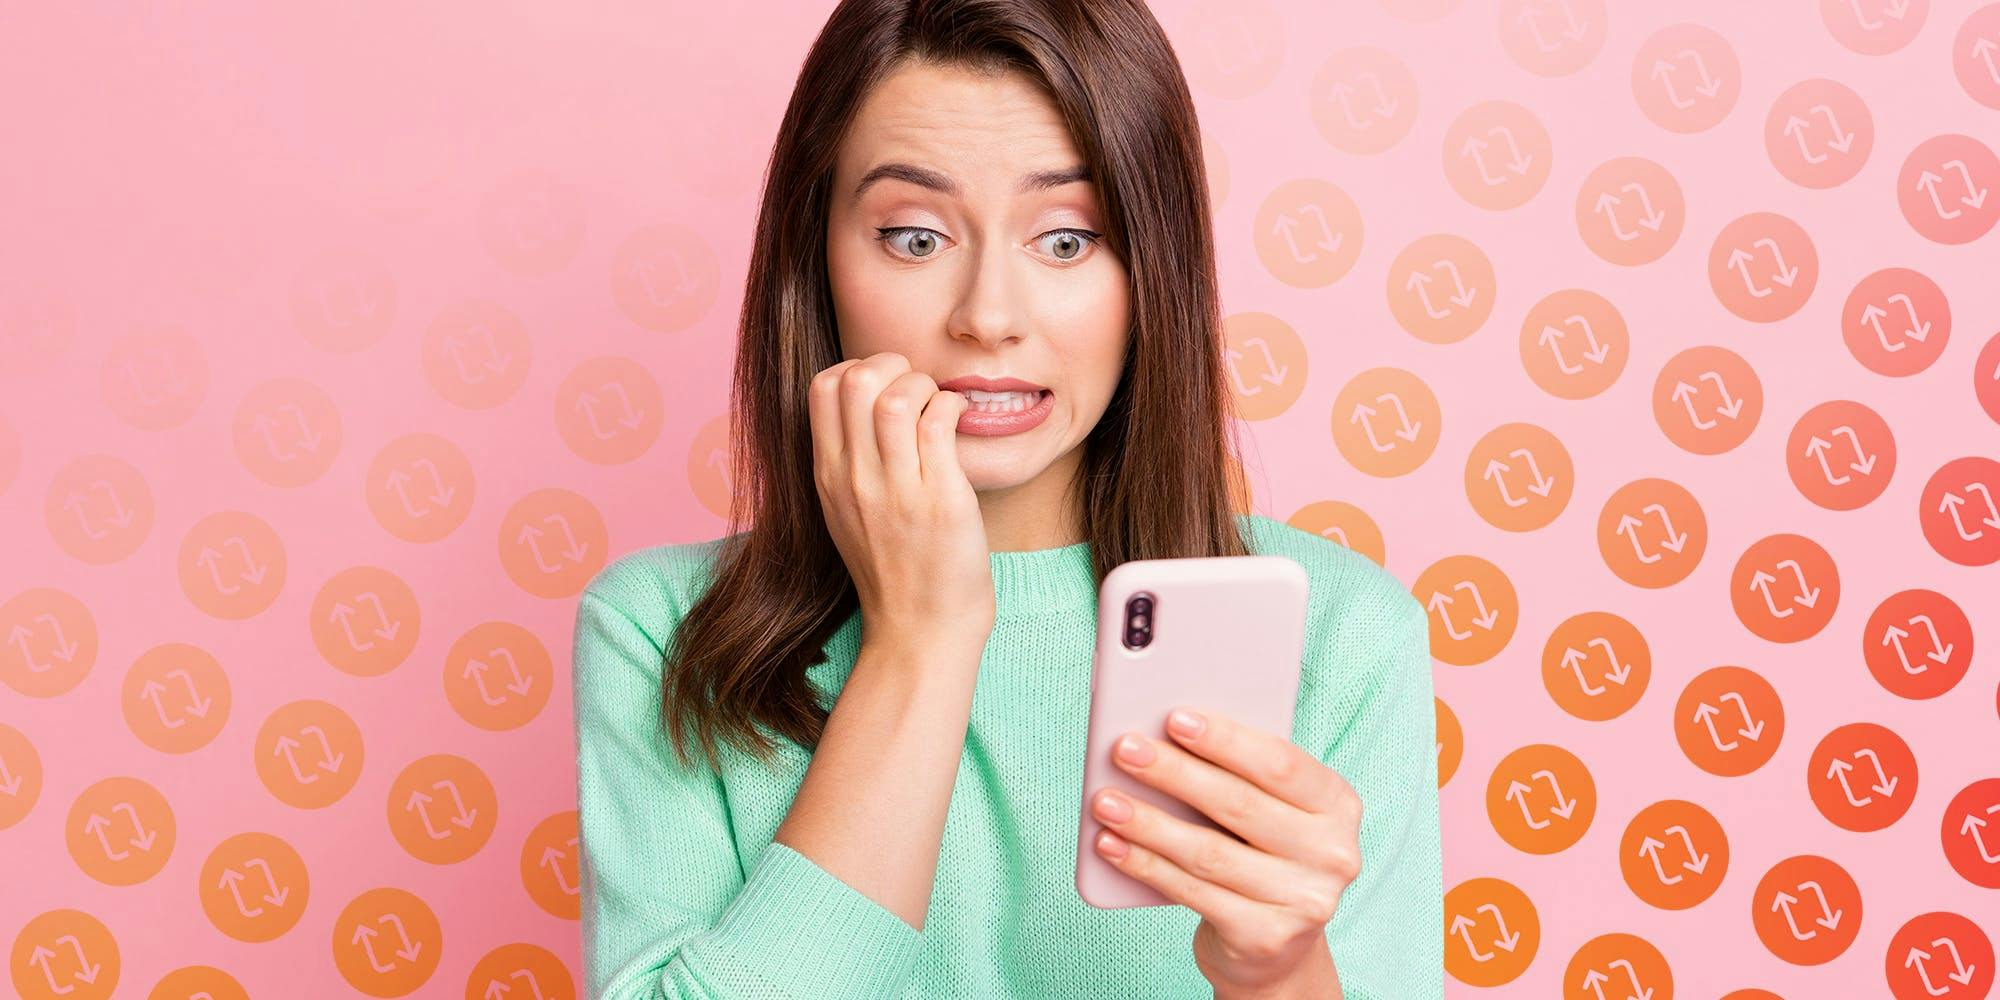 nervous woman chews nails while looking at phone, repost icon background